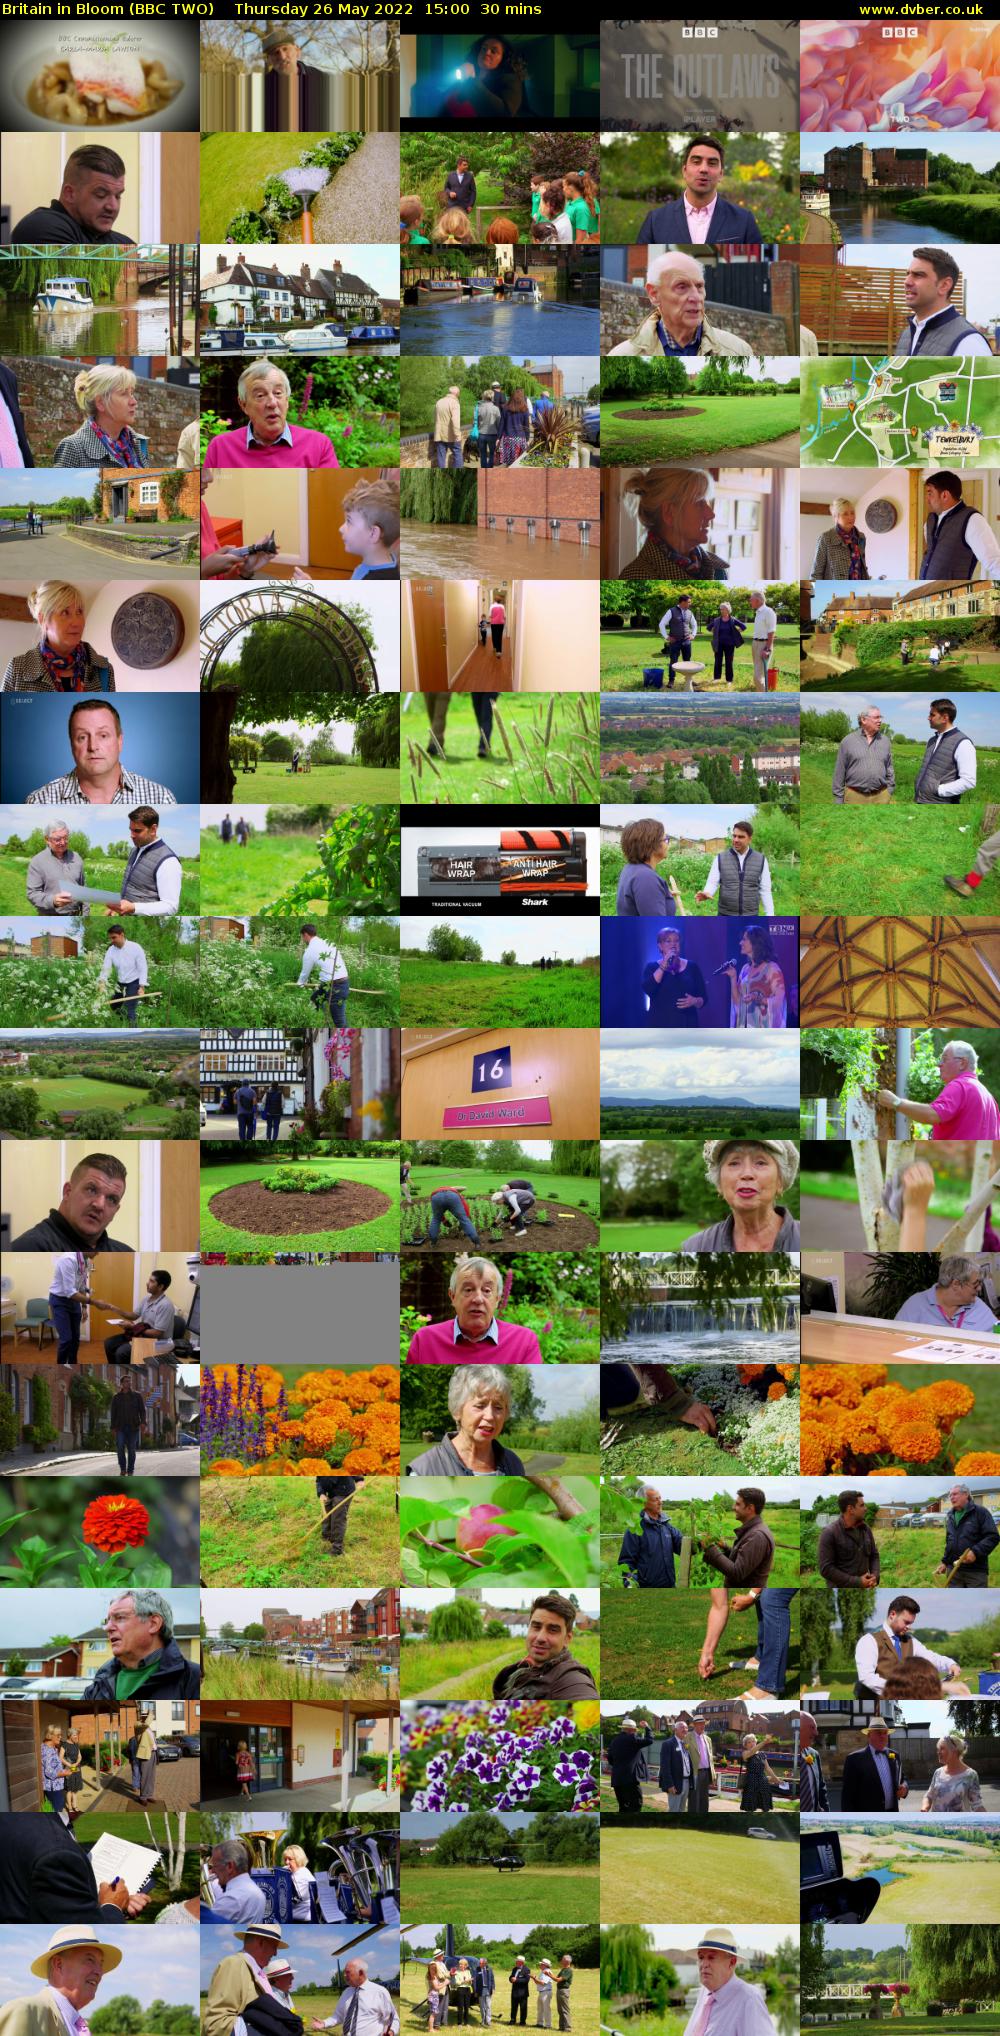 Britain in Bloom (BBC TWO) Thursday 26 May 2022 15:00 - 15:30